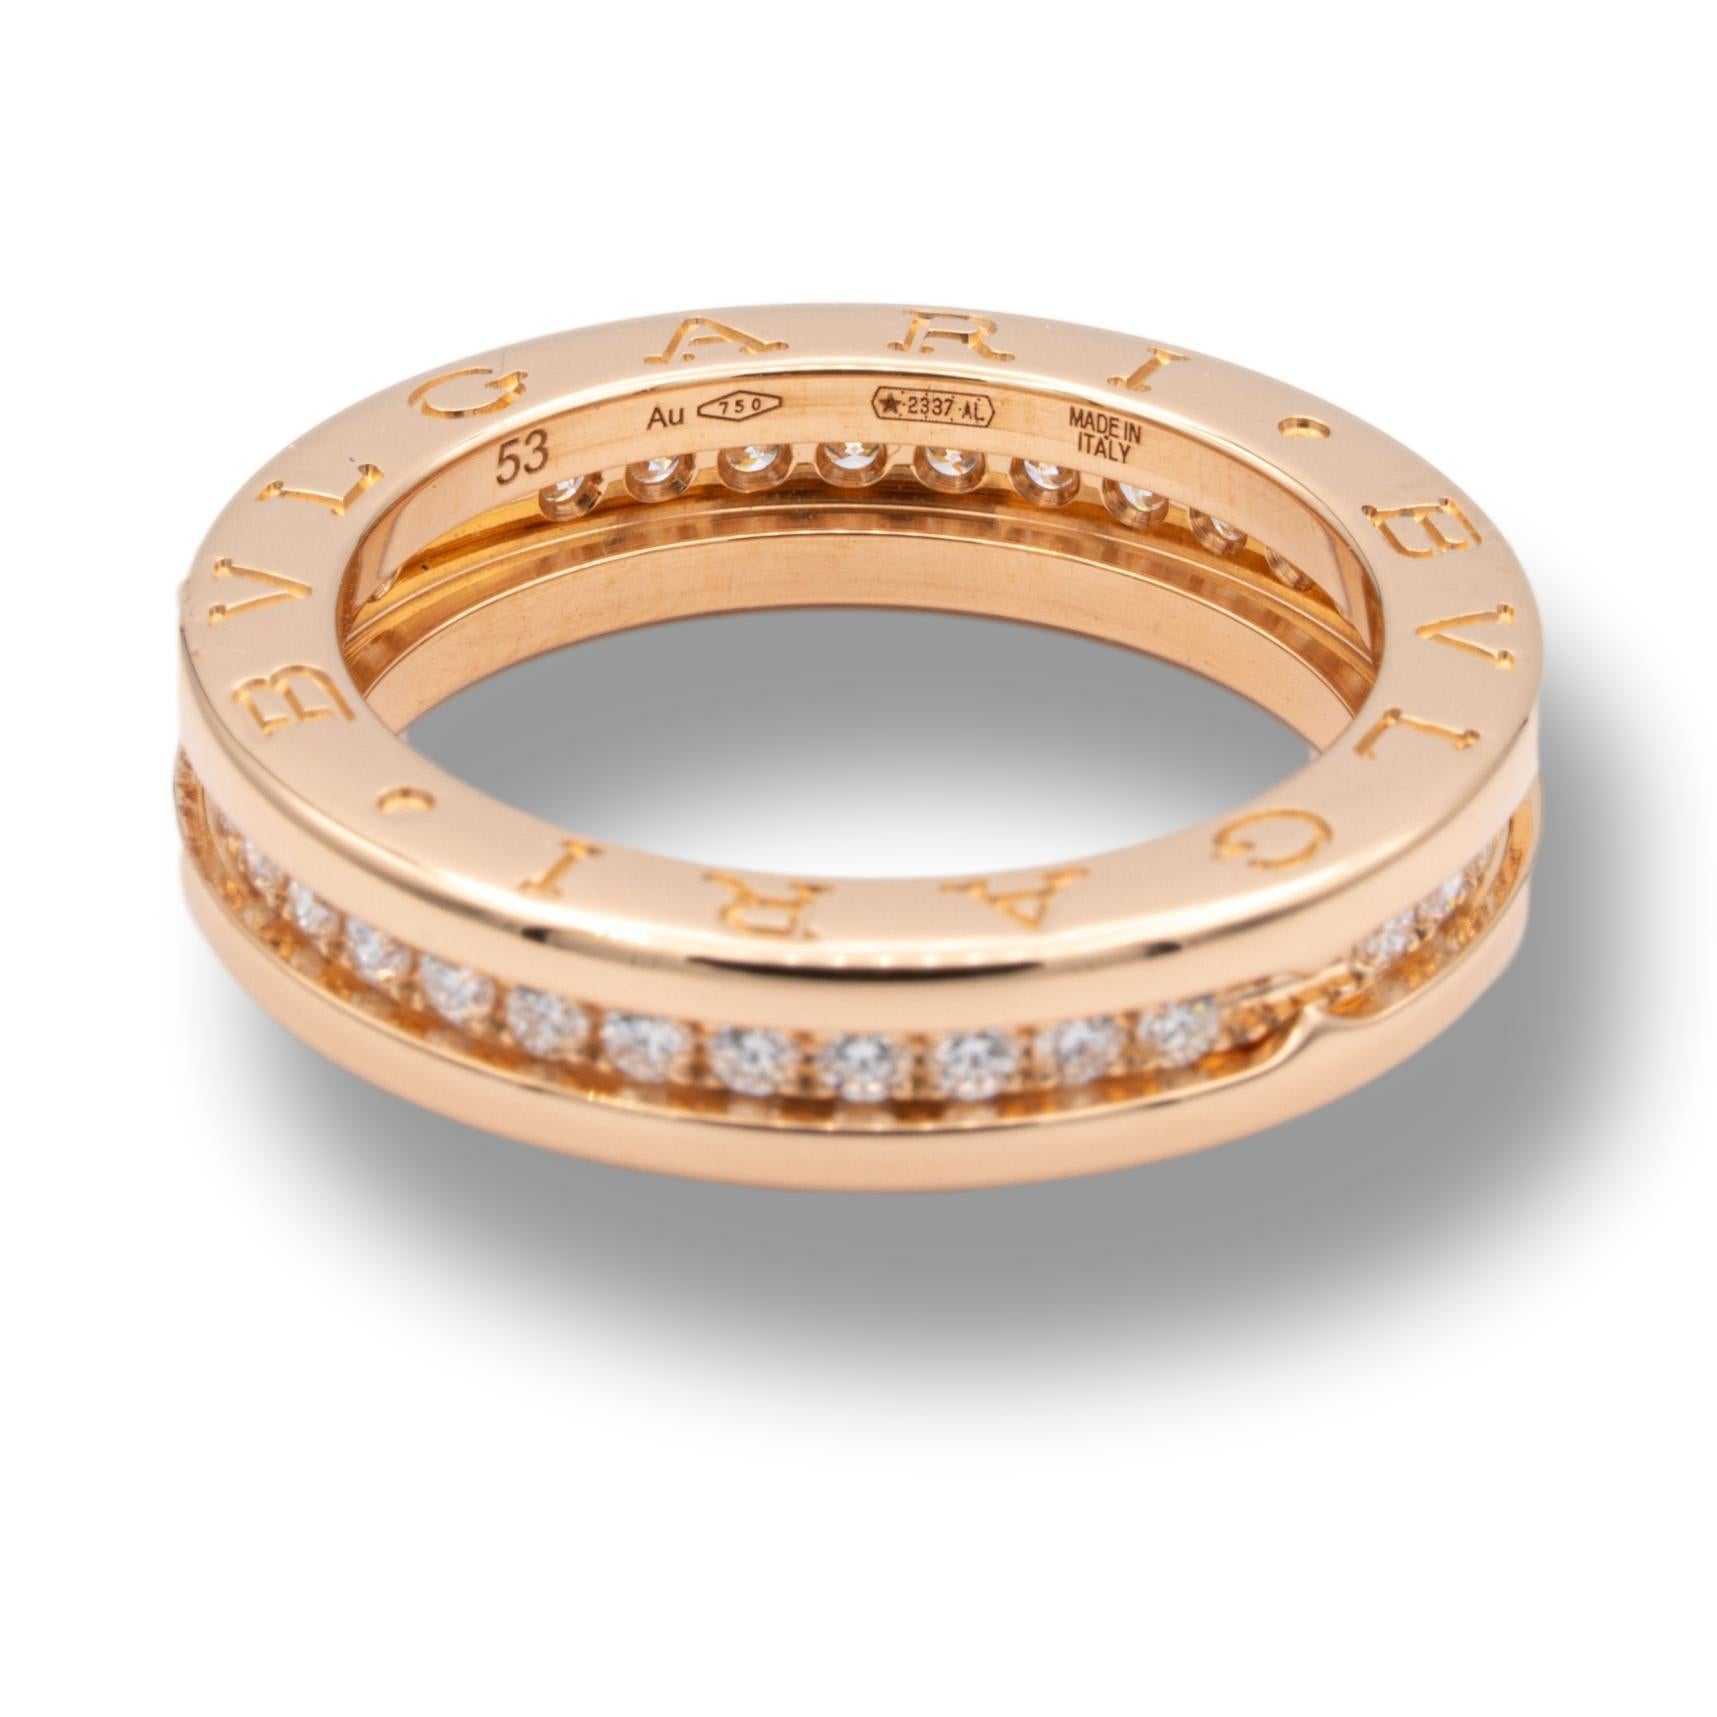 Bvlgari B-Zero band ring from the Labyrinth collection finely crafted in 18 karat rose and white gold studded with 1 row of bead set round brilliant cut diamonds weighing 0.48 carats total weight approximately. 

Made in Italy.

Stamp: BVLGARI 56